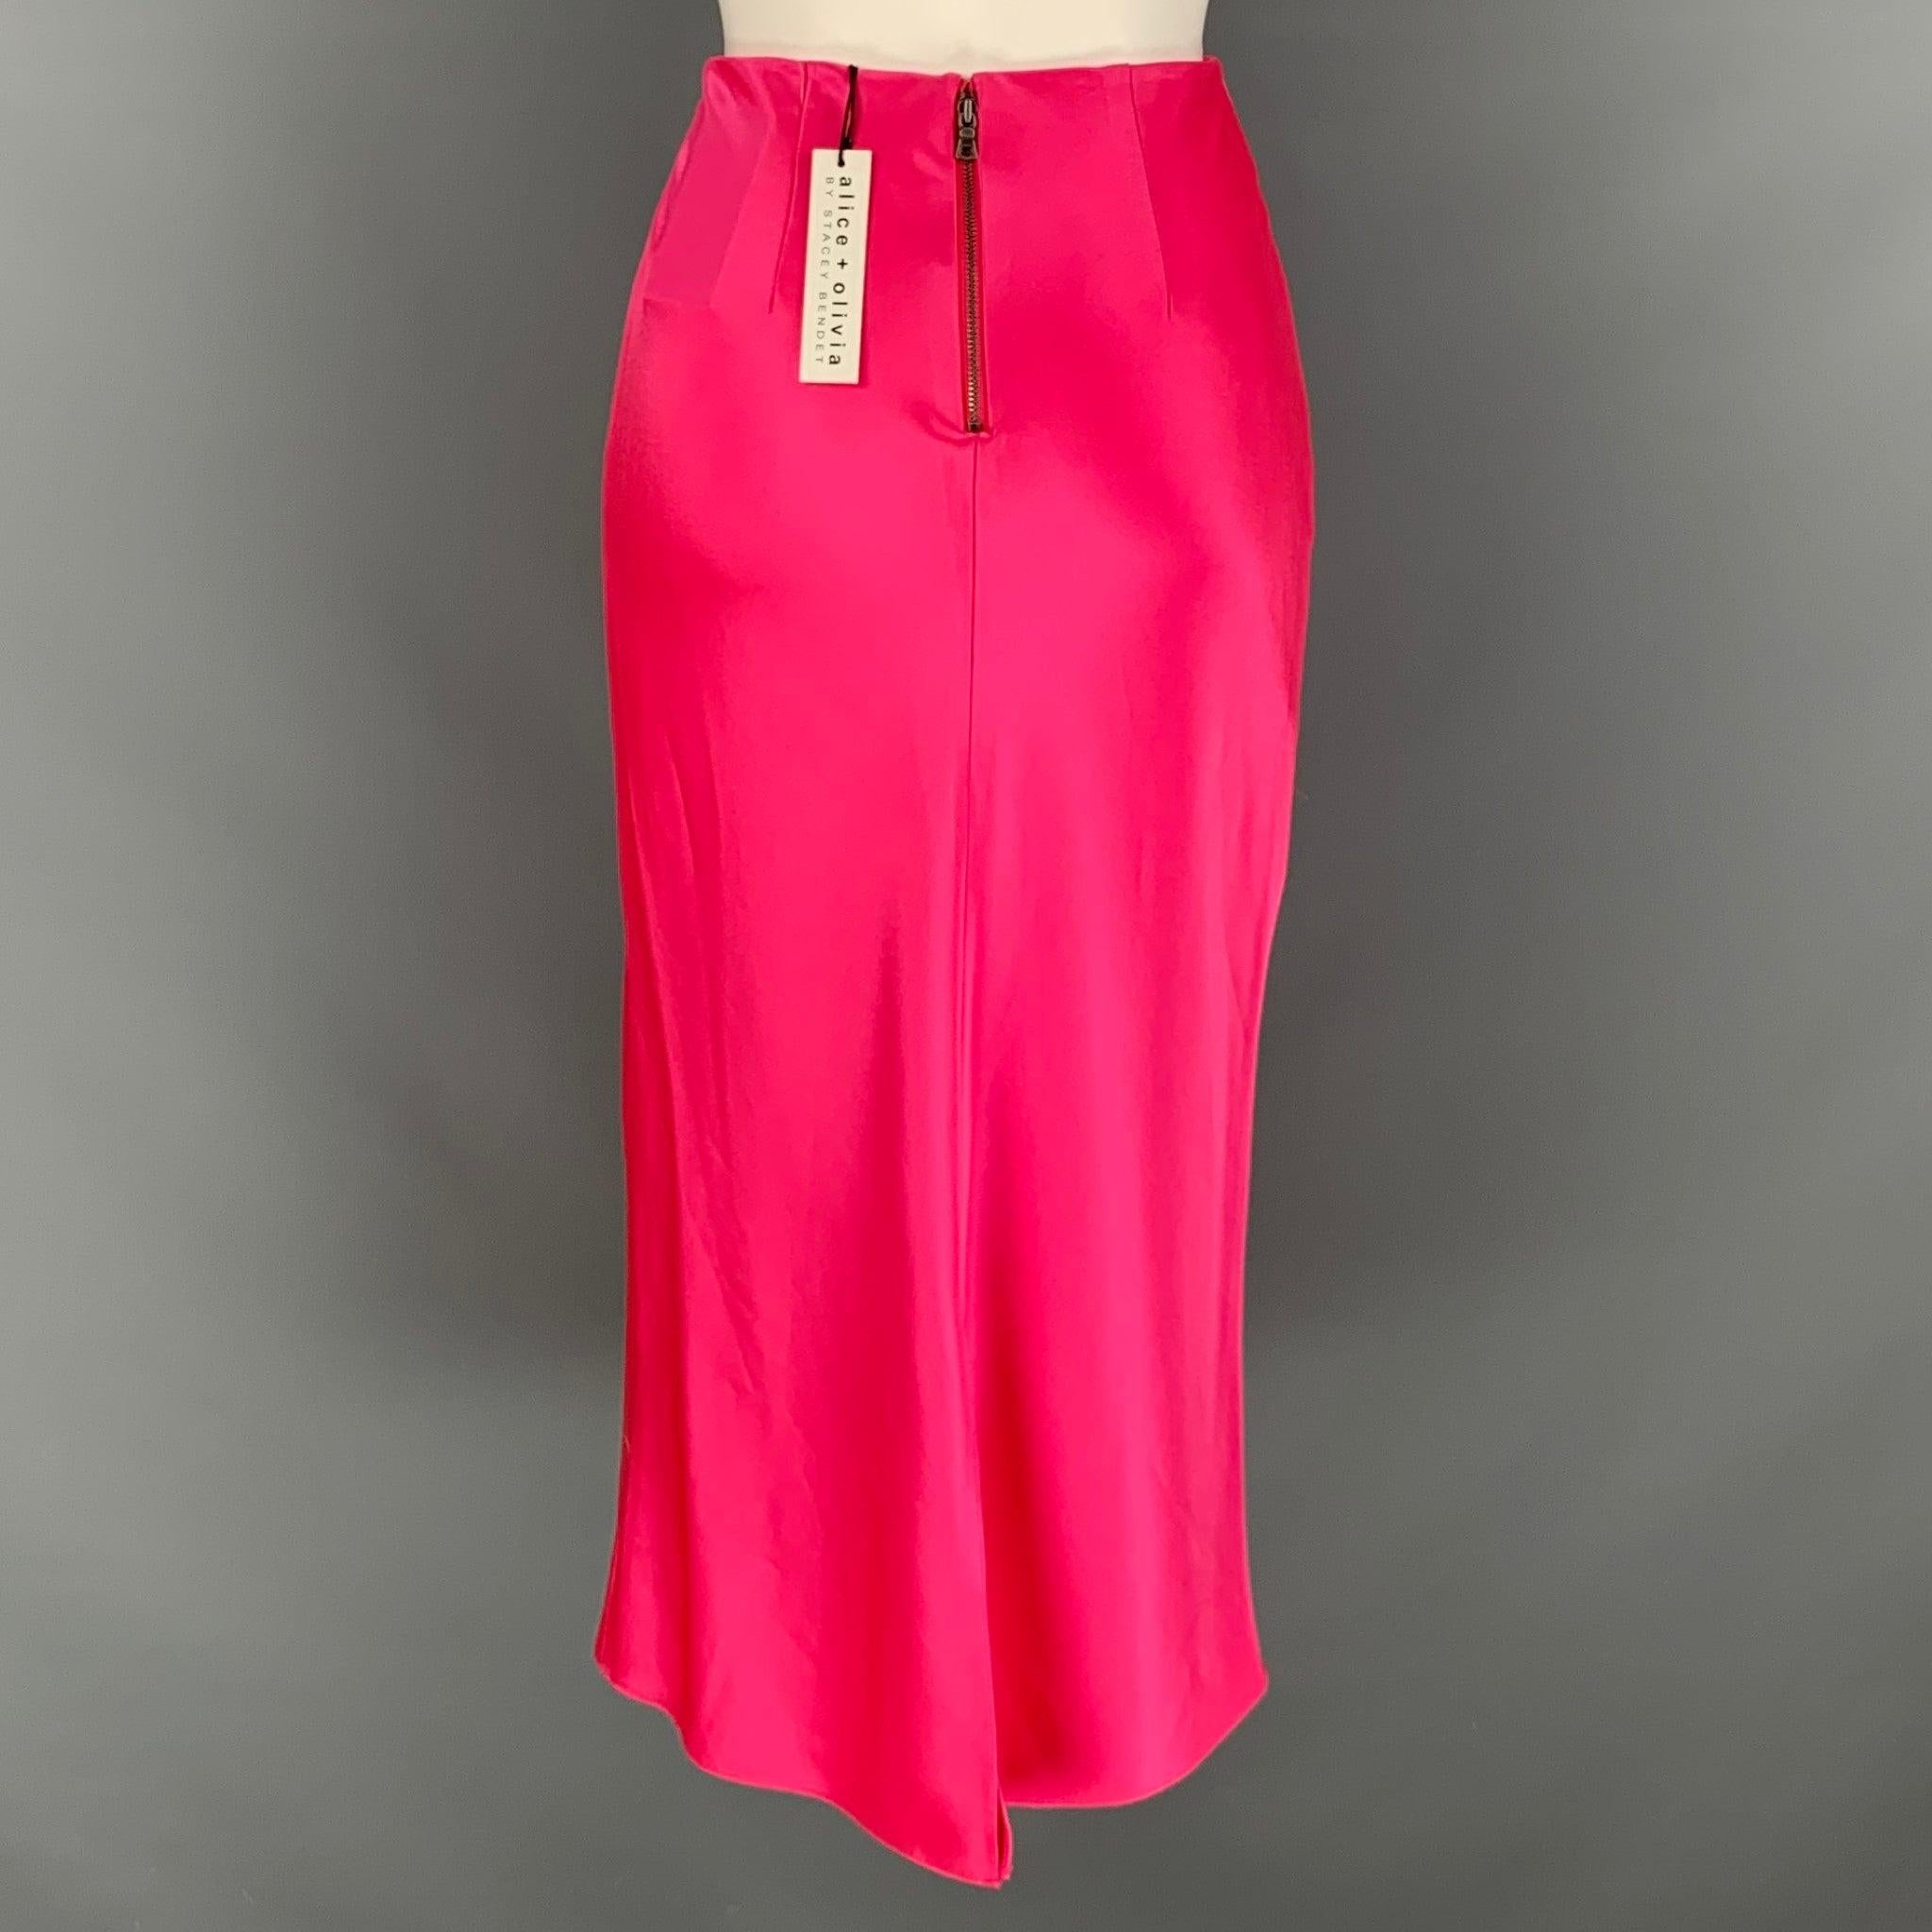 ALICE + OLIVIA skirt comes in a pink triacetate blend material featuring sateen look, mid calf length, and zip up closure at center back.
New with Tags. 

Marked:   no size market. 

Measurements: 
  Waist: 26 inHip: 34 inches Length: 33 inches 
 
